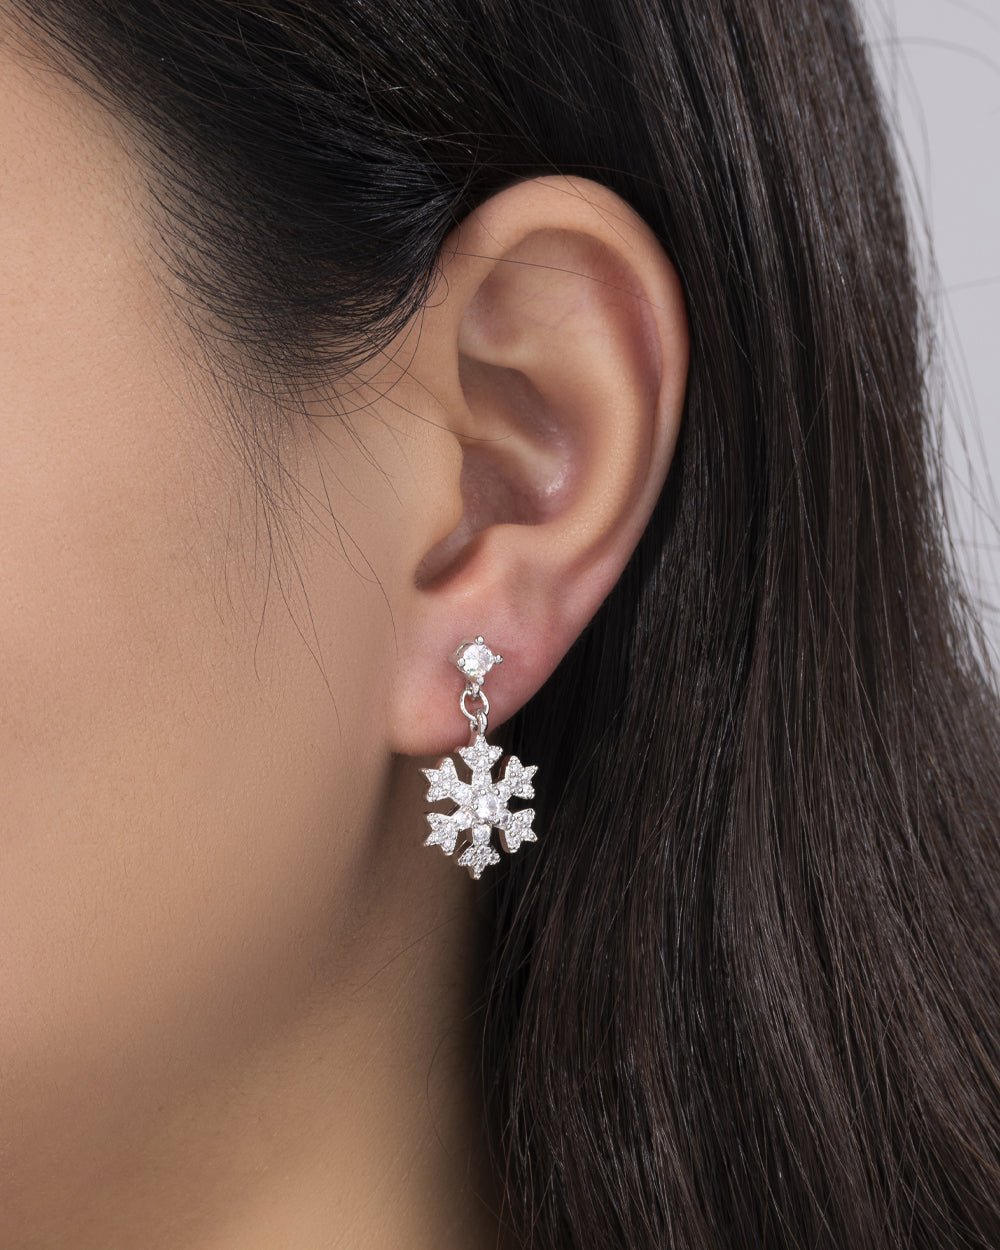 ICY SNOWFLAKE EARRINGS. - WHITE GOLD